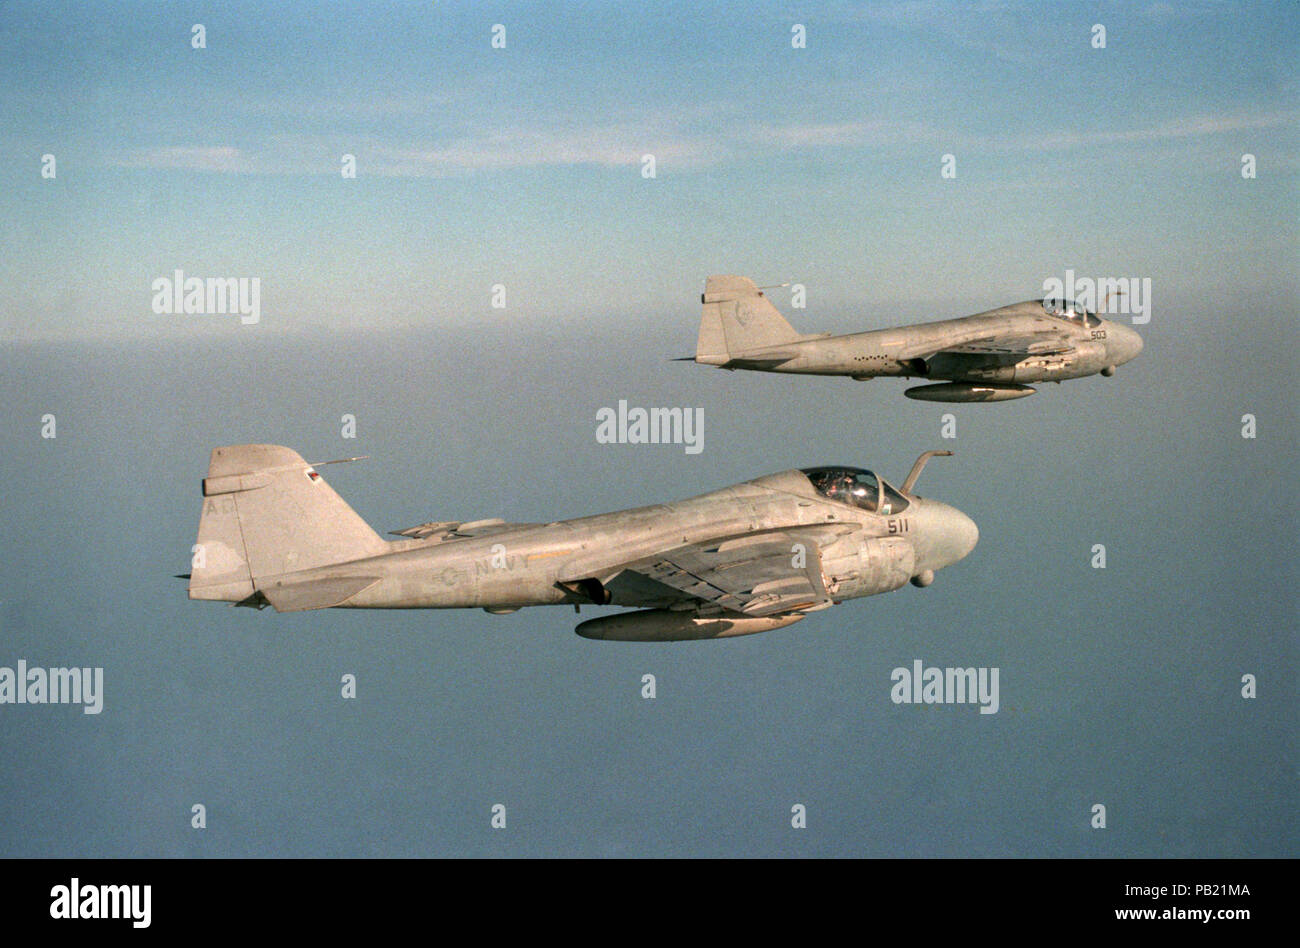 A-6E Intruders of Attack Squadron 34 in flight over the Mediterranean Sea on 1 June 1988 (6430215). An air-to-air right side view of two A-6E Intruder aircraft from Attack Squadron 34 (VA-34). Stock Photo